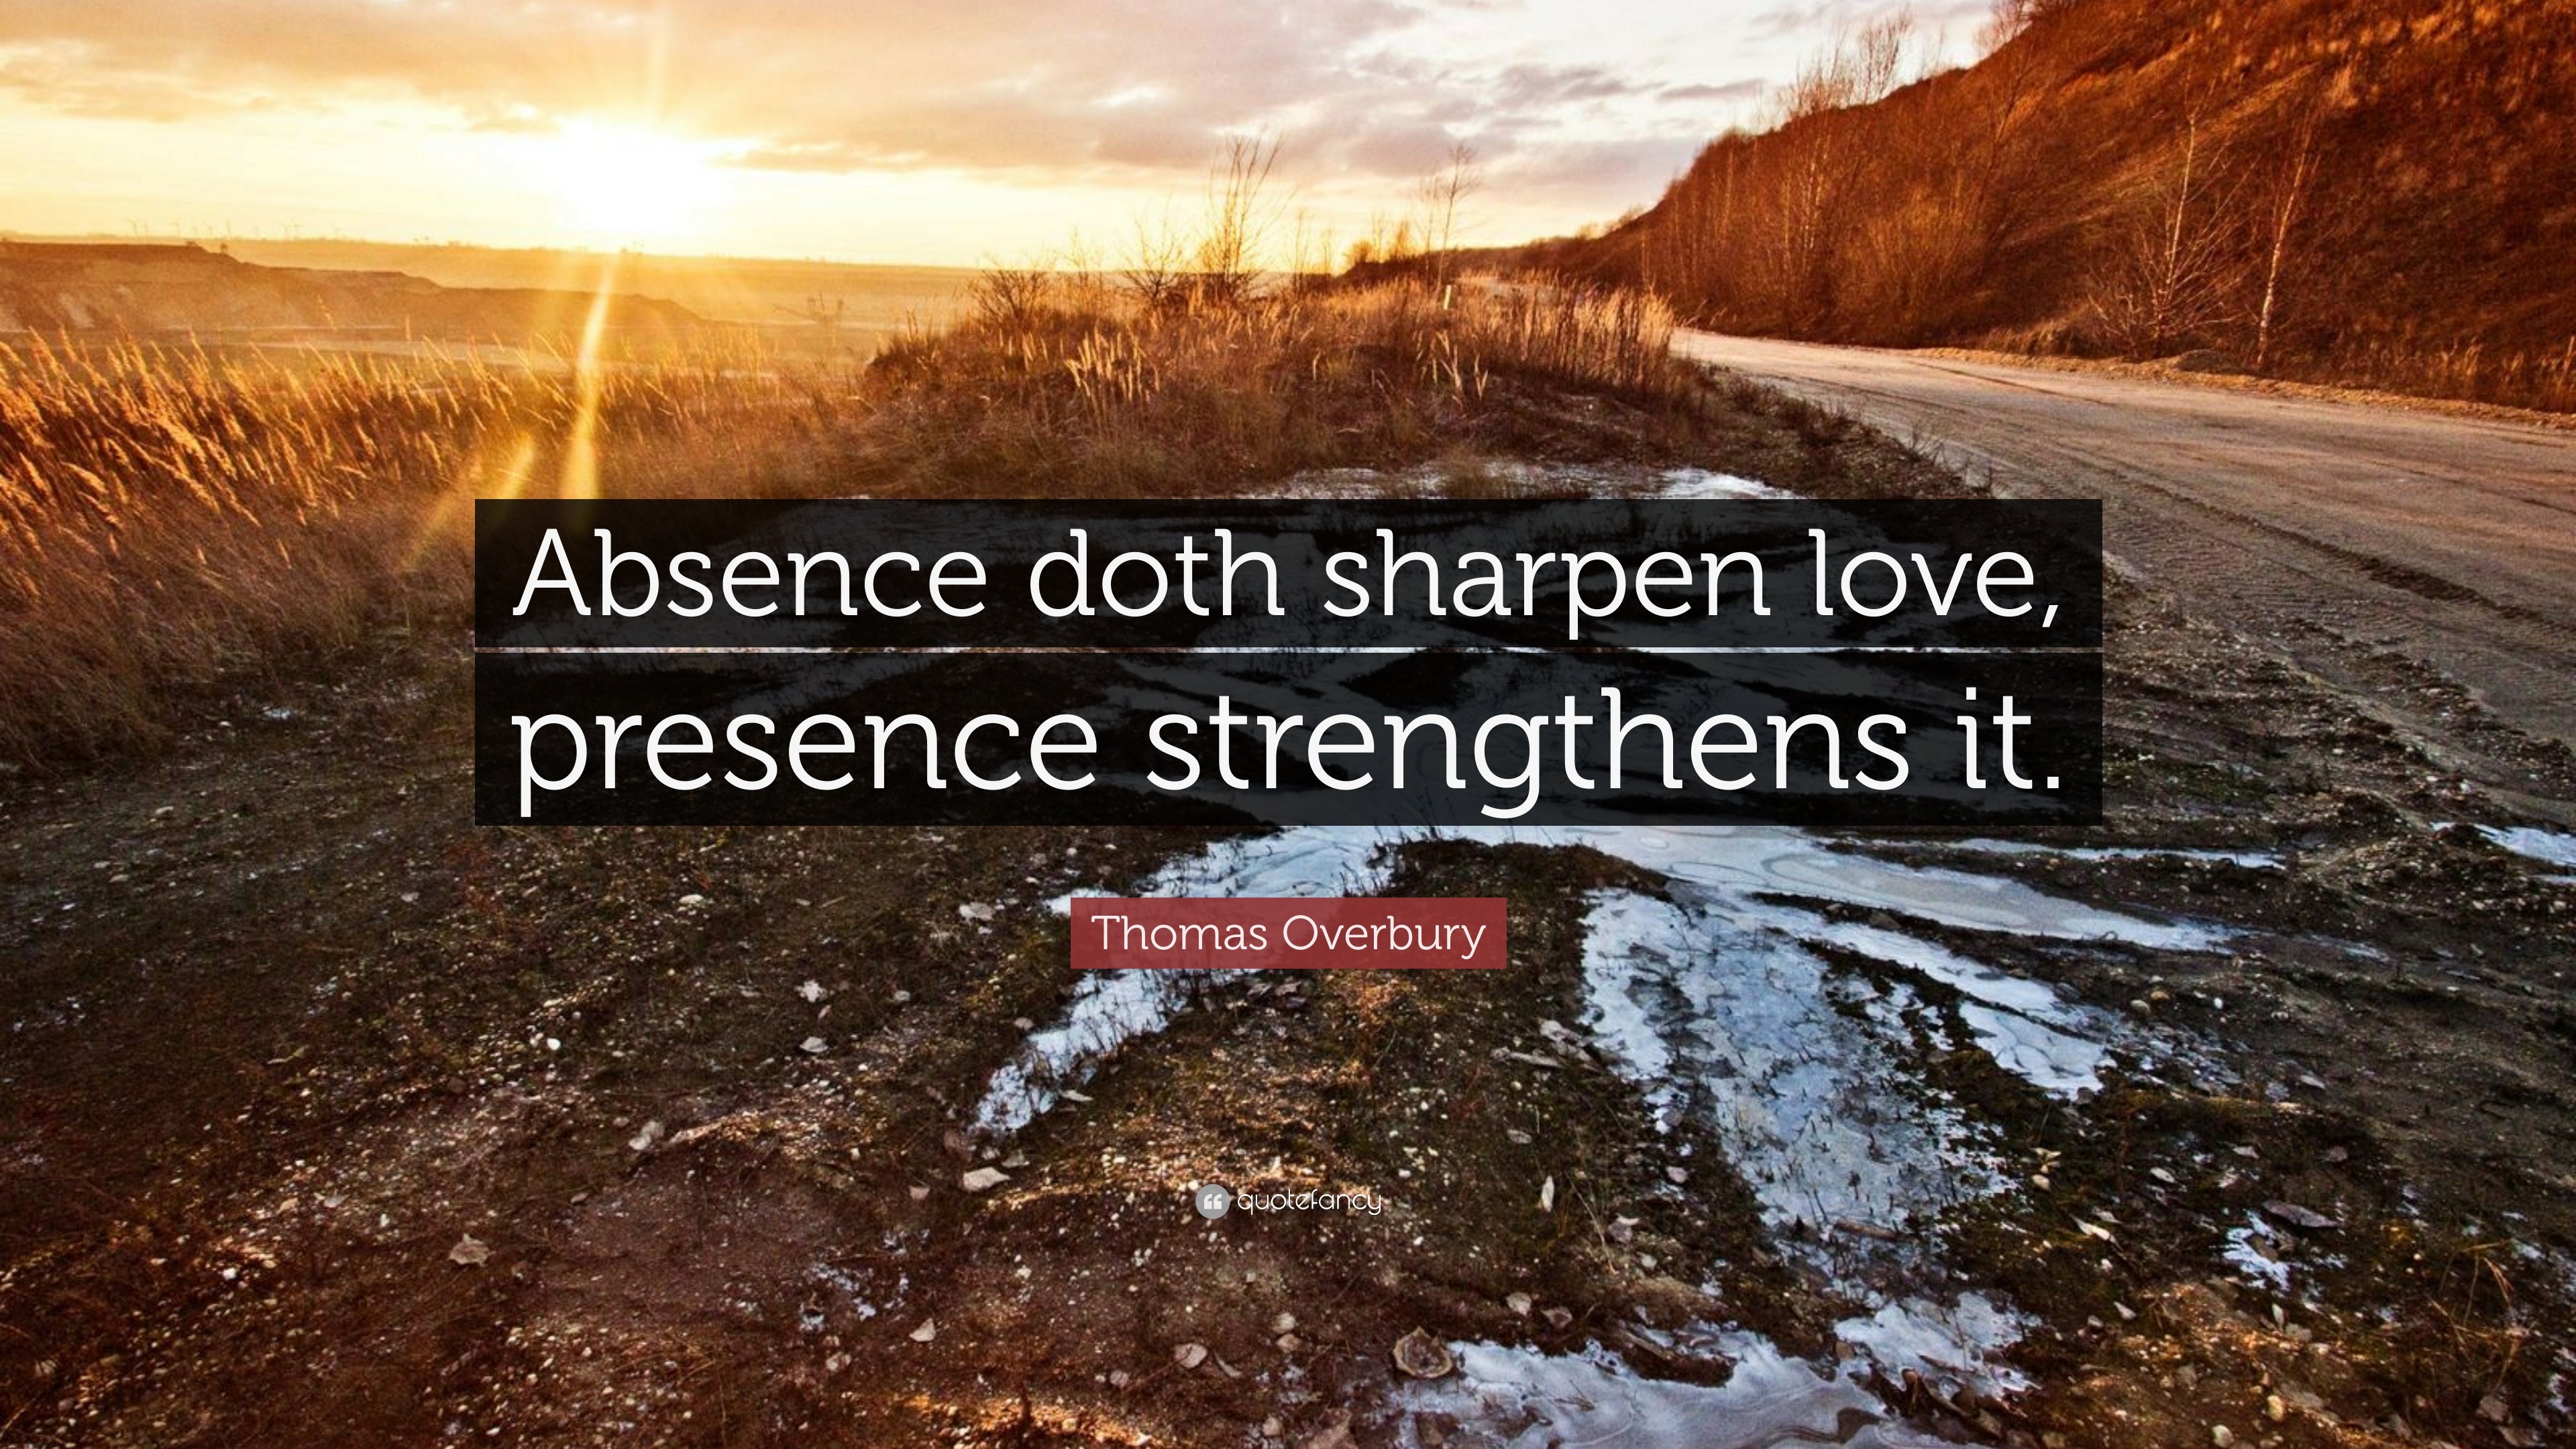 Thomas Overbury Quote Absence Doth Sharpen Love Presence Strengthens It